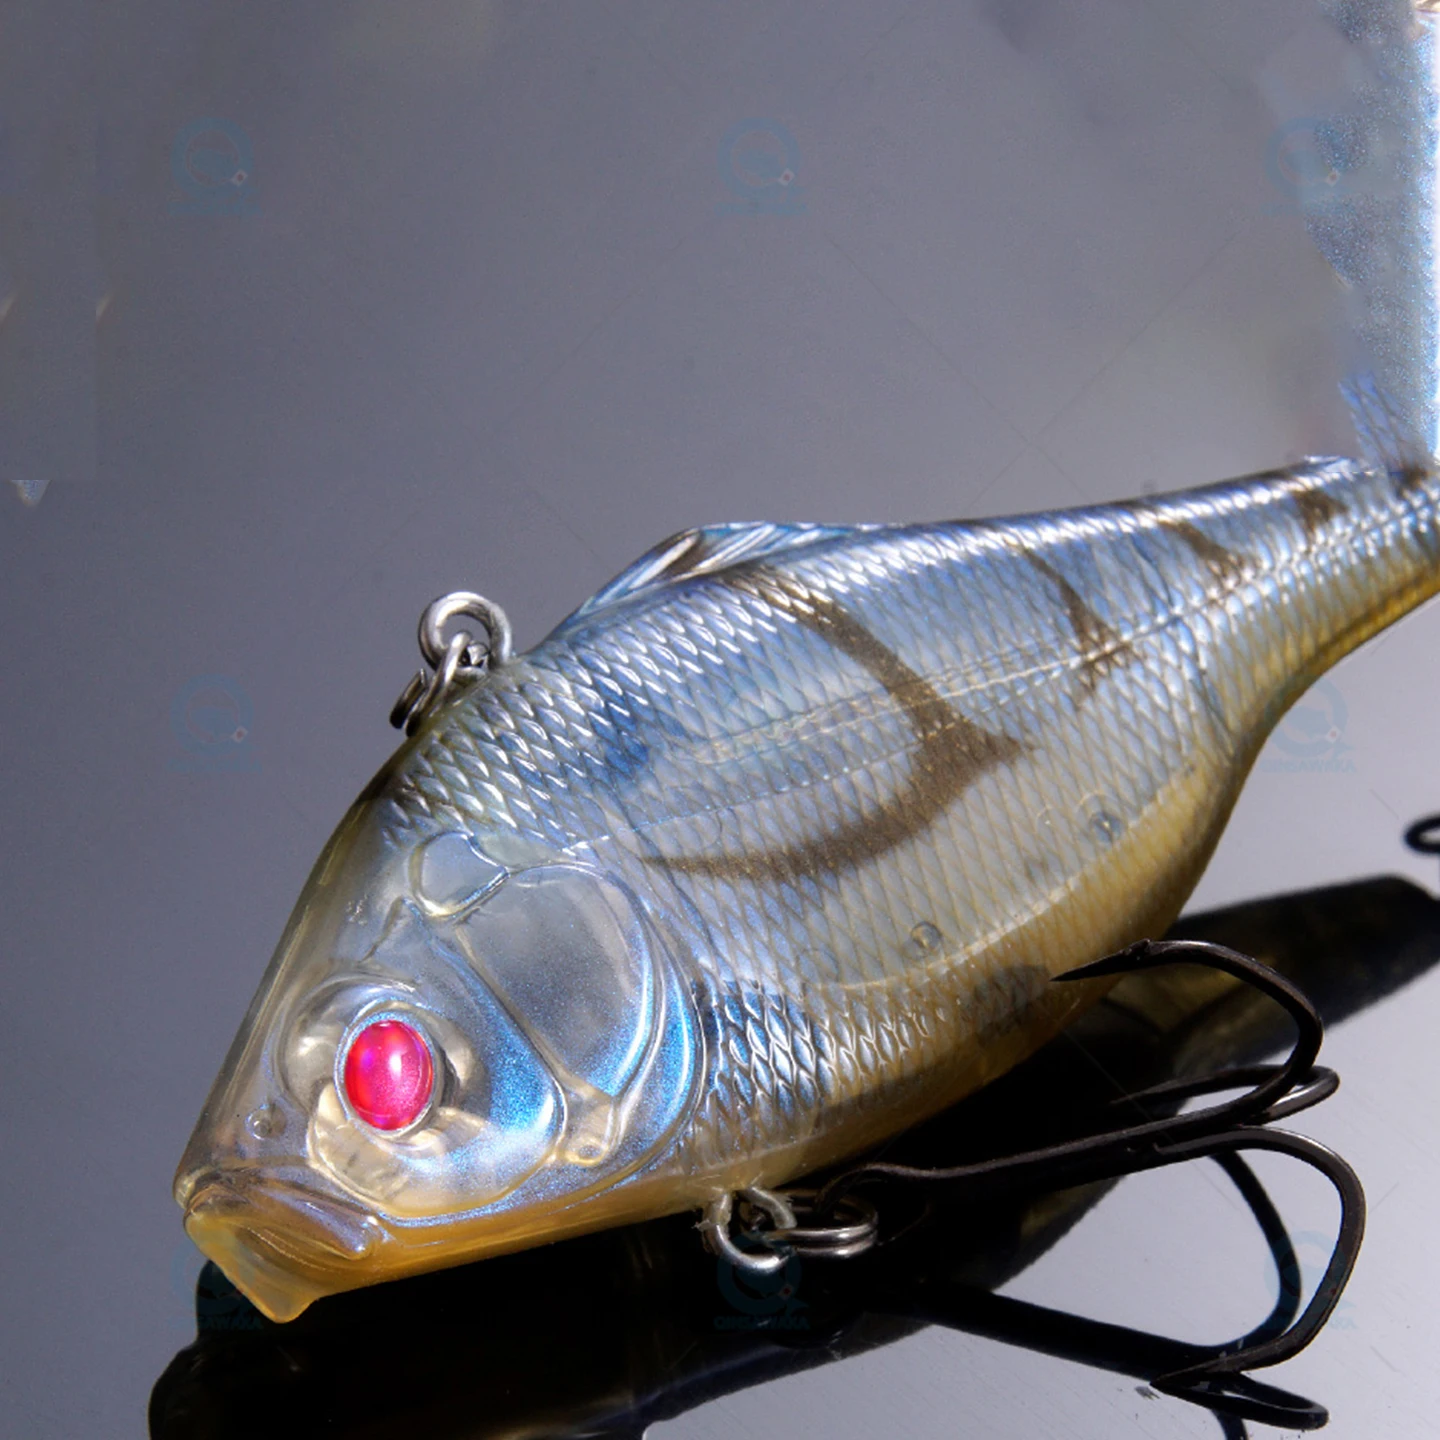 2023.3 NEW Limited COLOR RED EYE GLASS SHIRMP RESPECT 51 JAPAN Megabass  Fishing Lure BASS Sea Tackle VISION ONETEN JR LBO